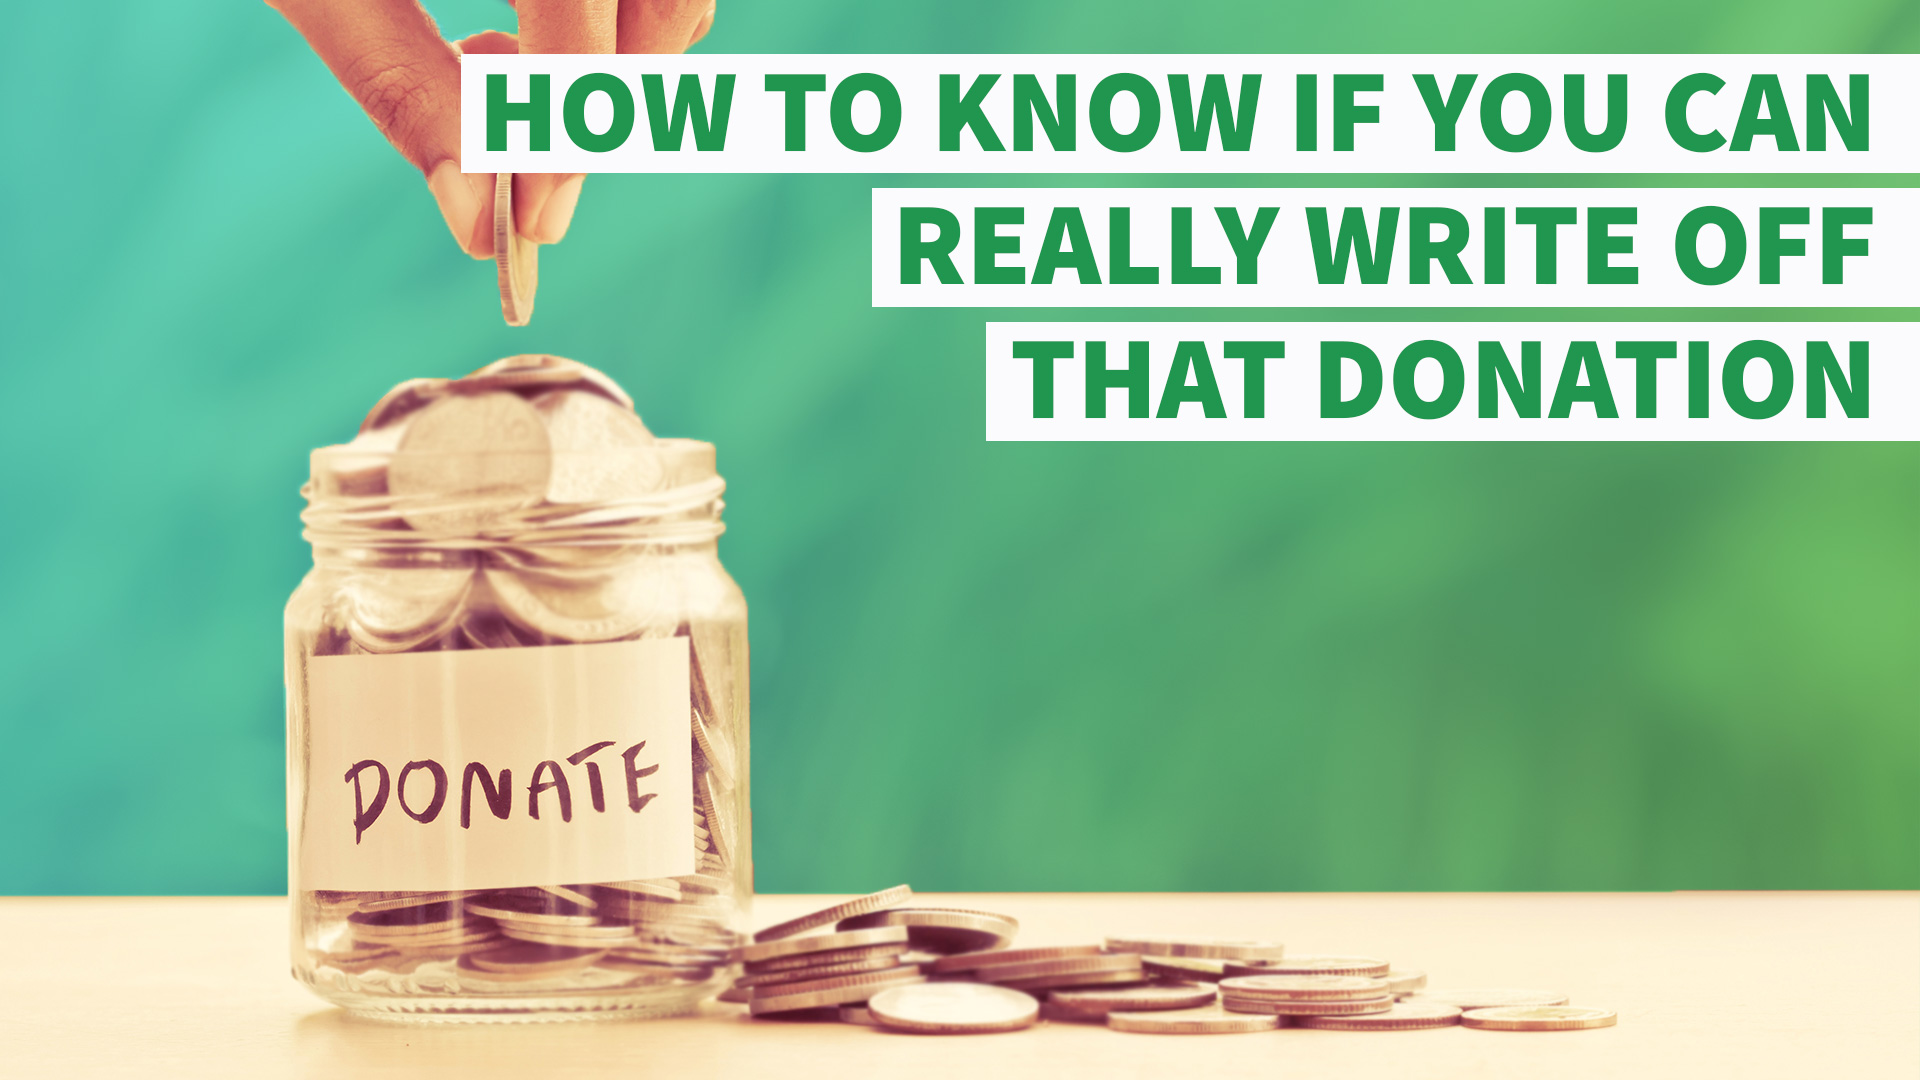 How to write off charitable donations